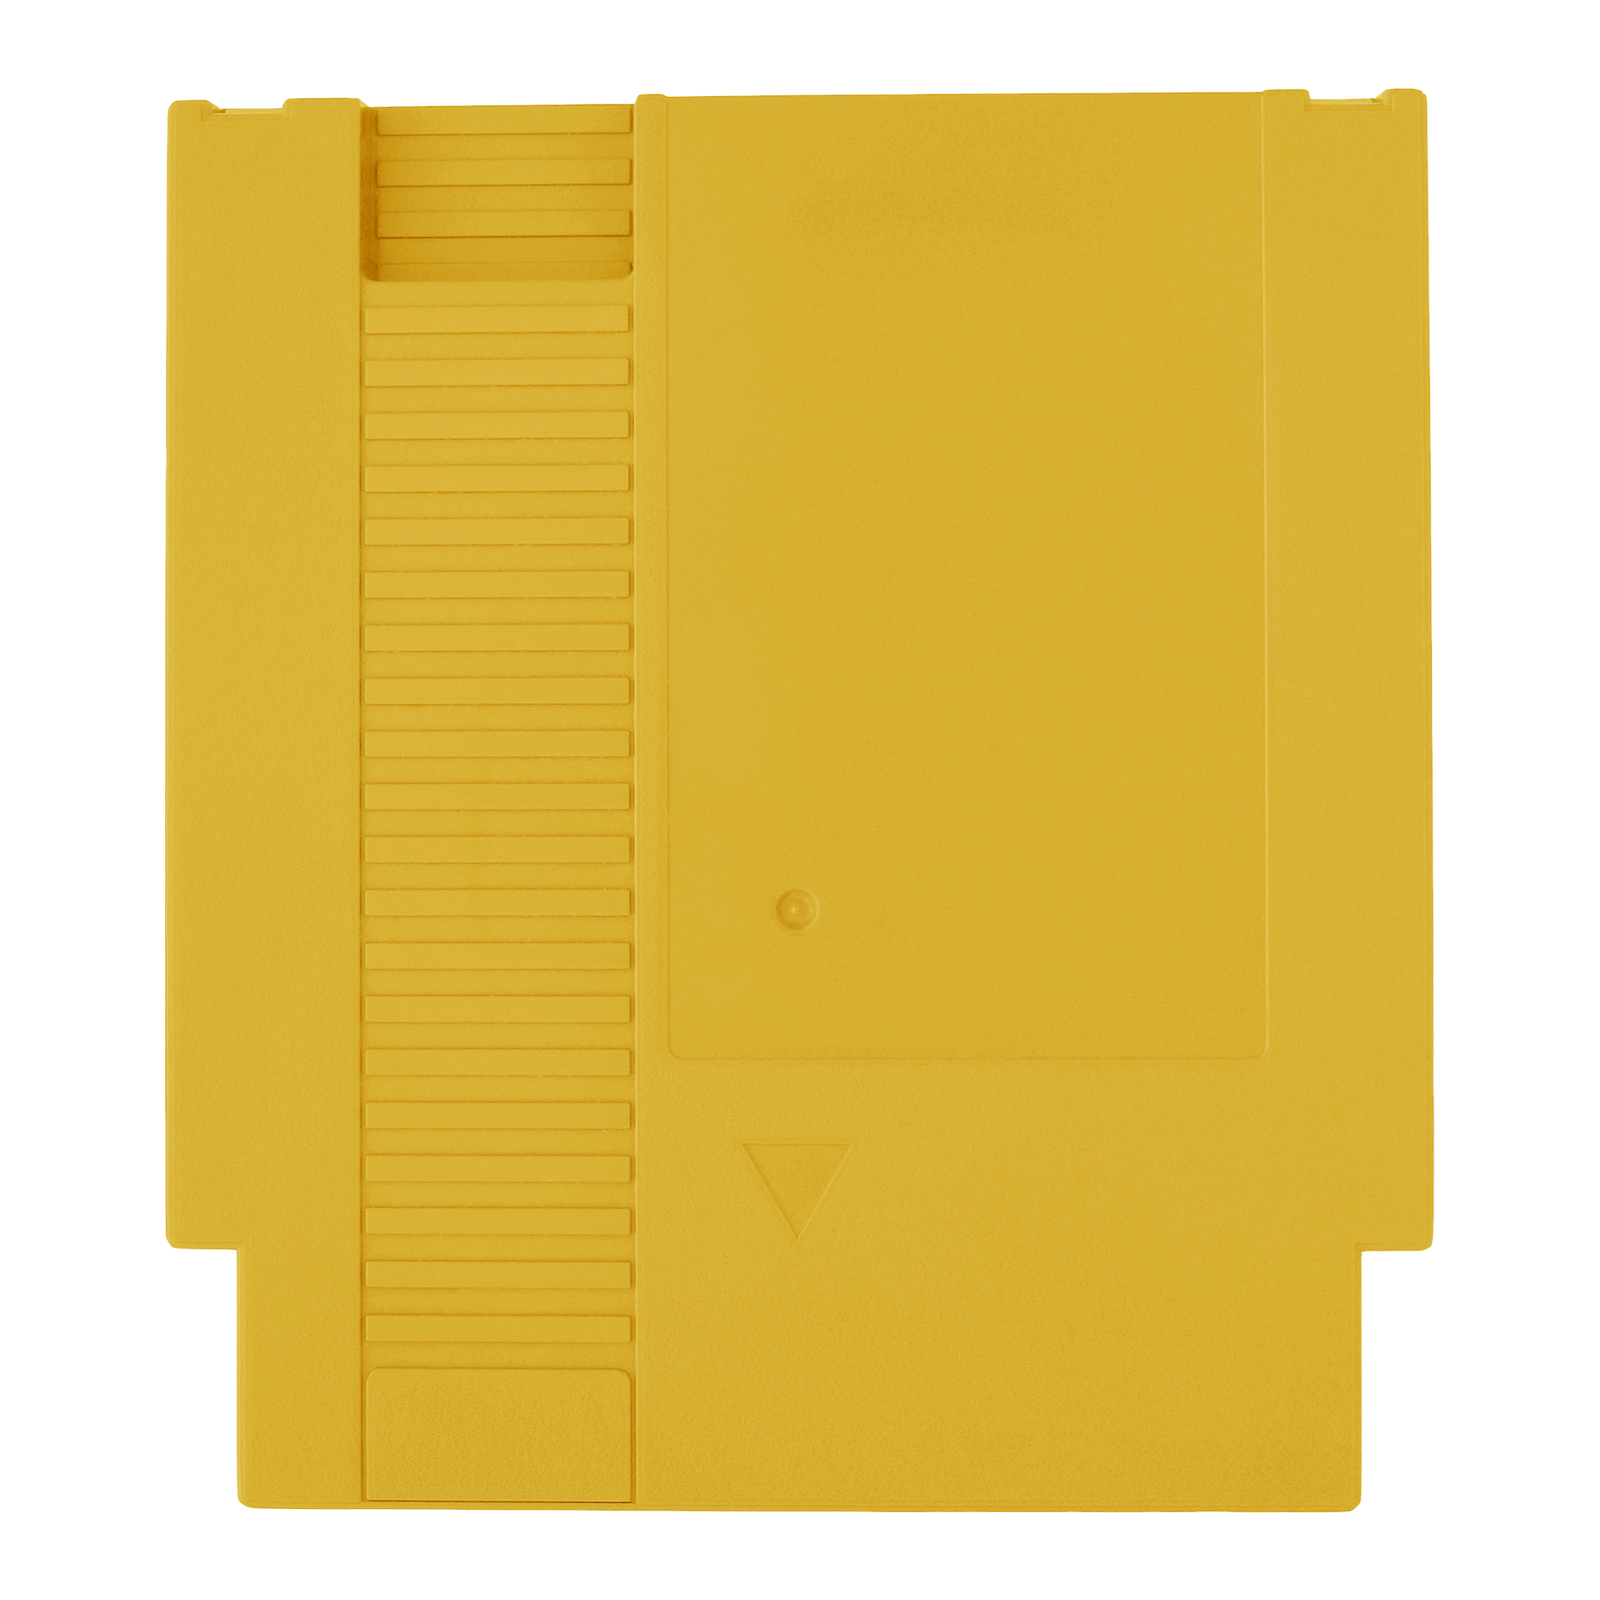 nes replacement shell